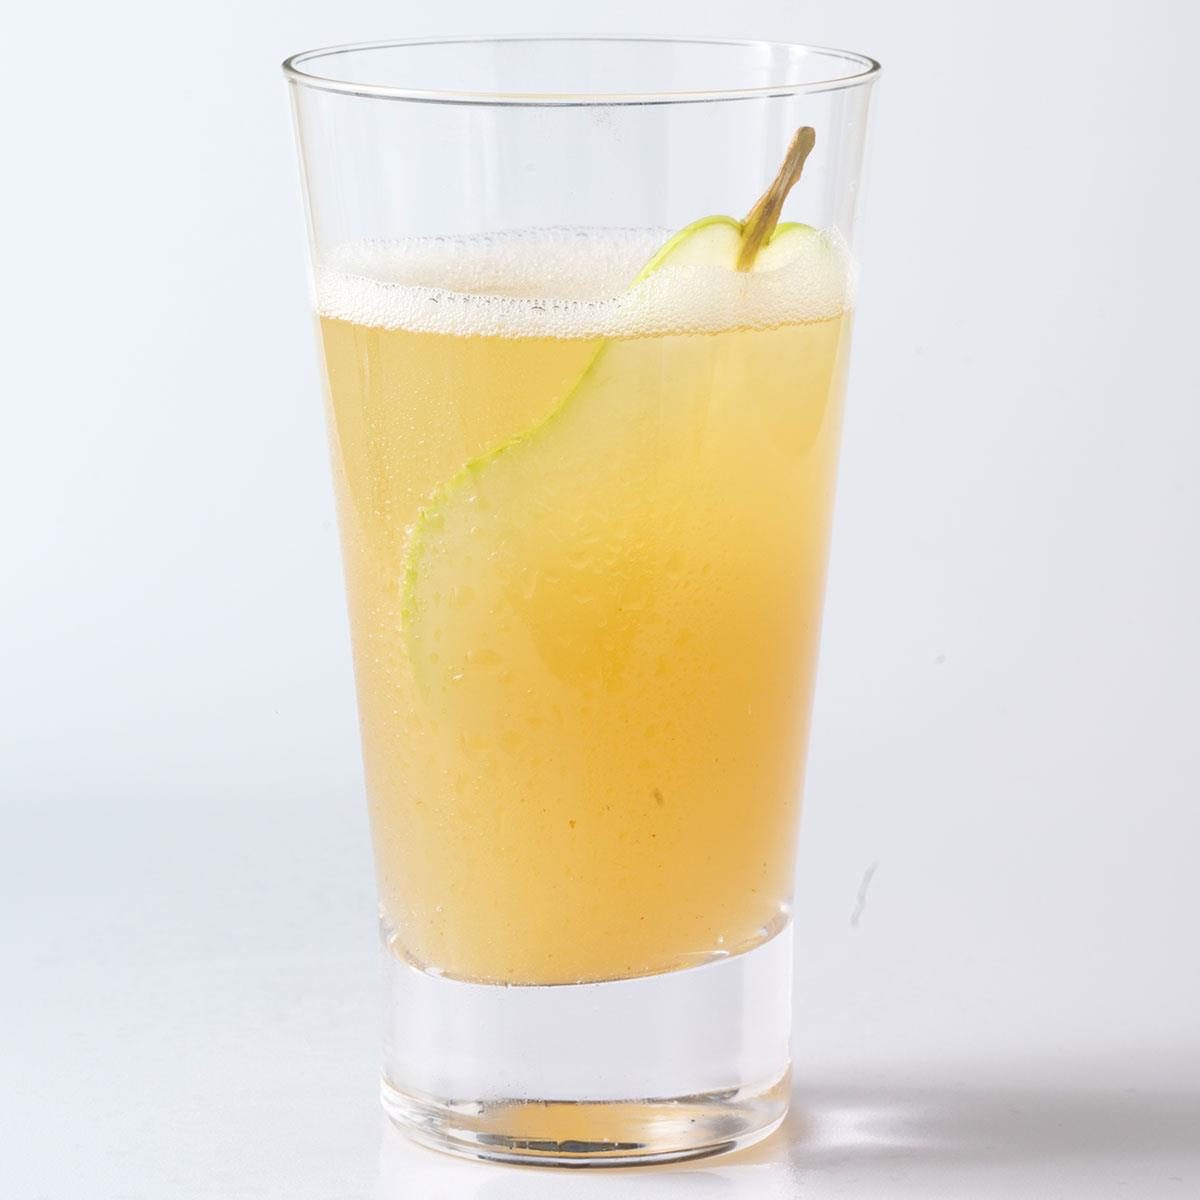 Ginger Pear Sipper